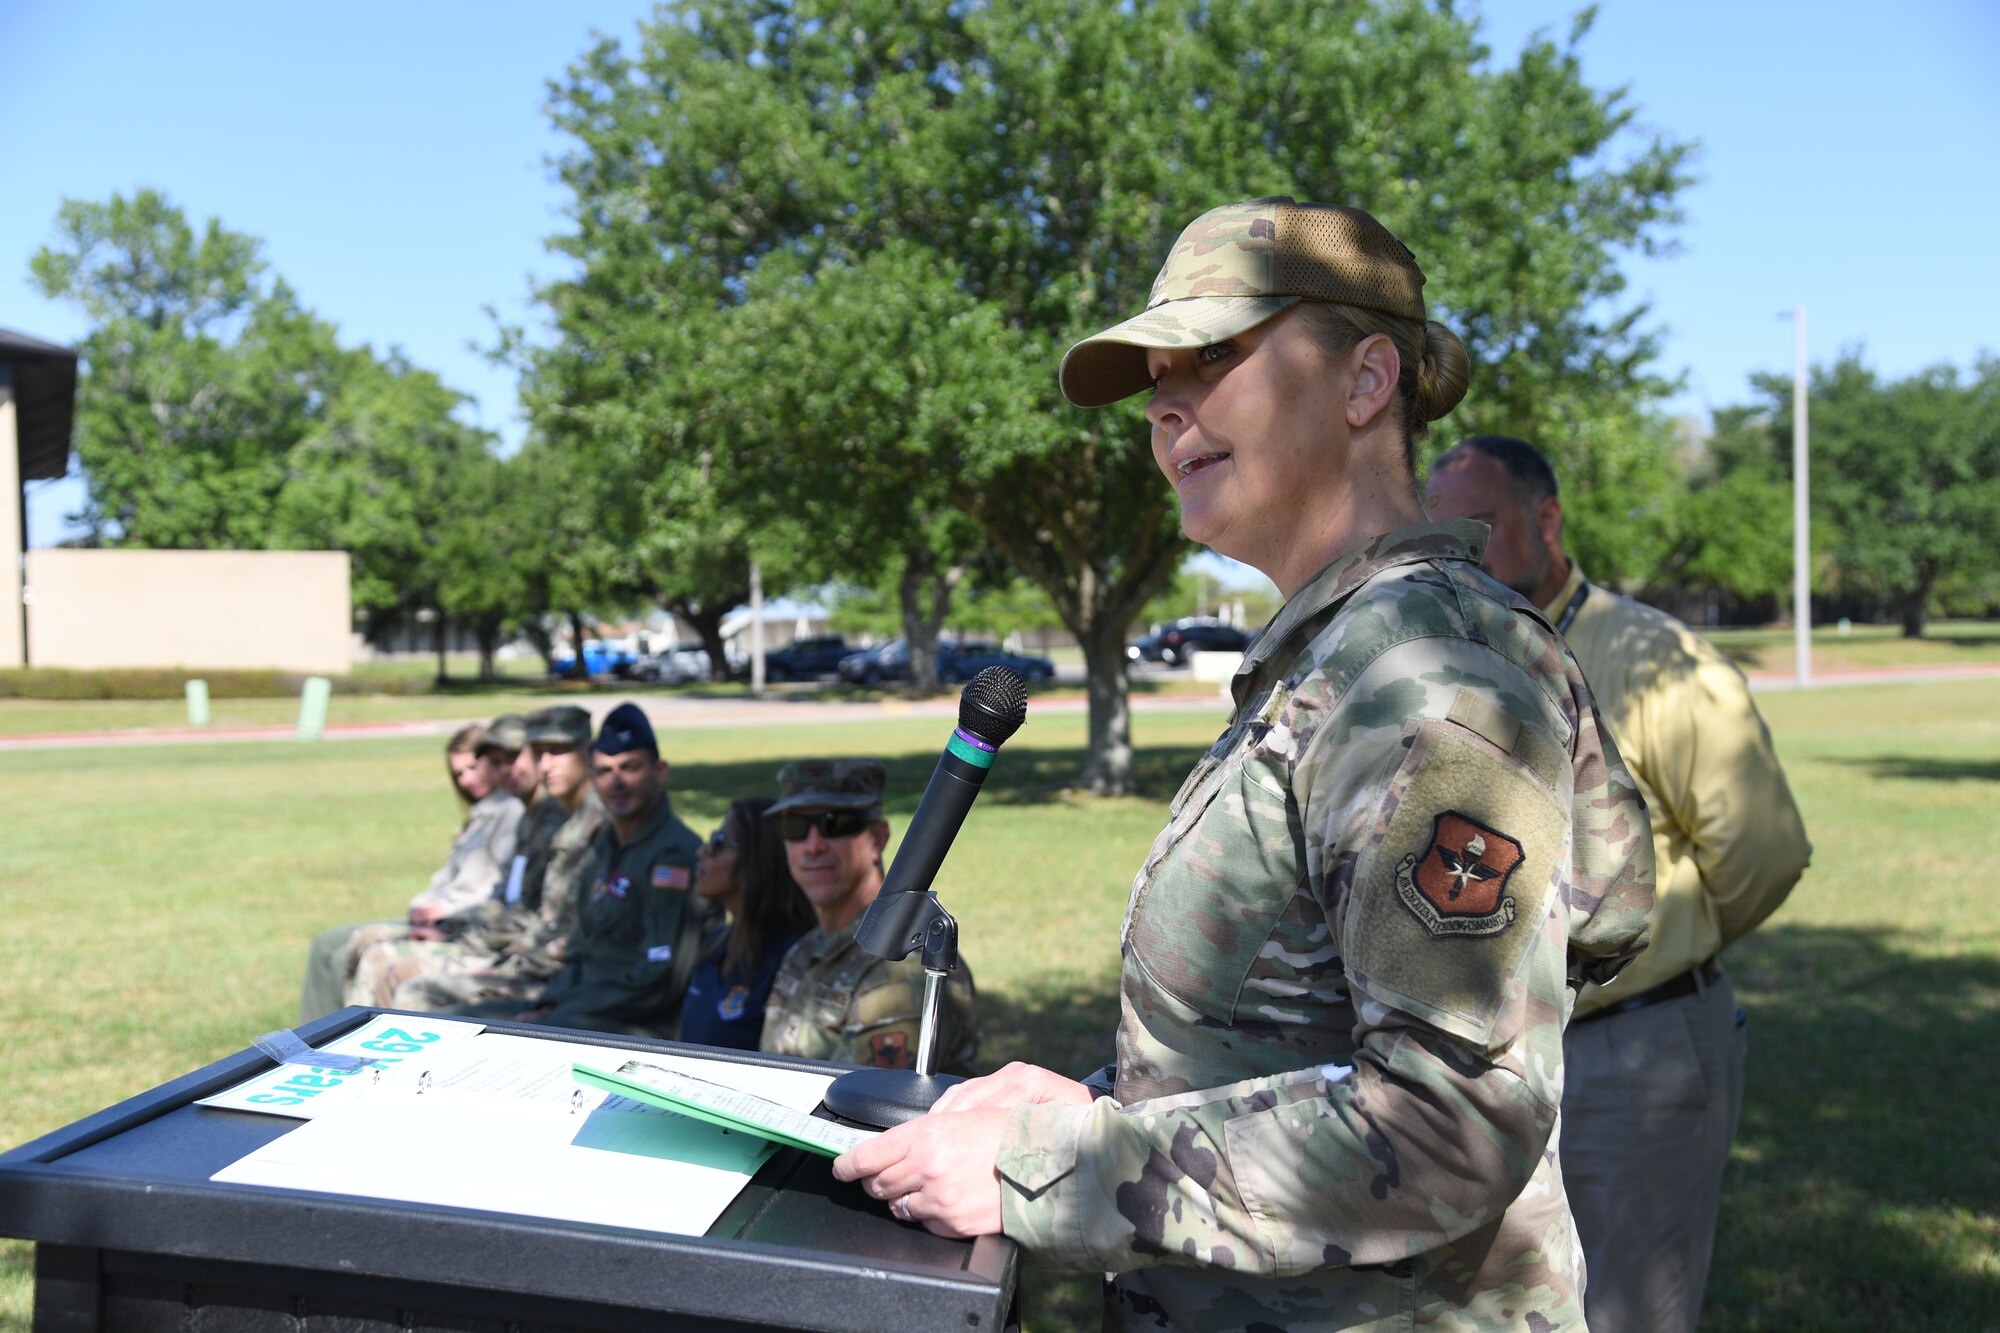 U.S. Air Force Chief Master Sgt. Sarah Esparza, 81st Training Wing command chief, reads the Arbor Day proclamation to a preschool class at the Keesler Child Development Center during the Arbor Day Celebration at Keesler Air Force Base, Mississippi, April 28, 2022. A tree planting ceremony and a Tree City USA flag presentation also took place at the event. (U.S. Air Force photo by Kemberly Groue)